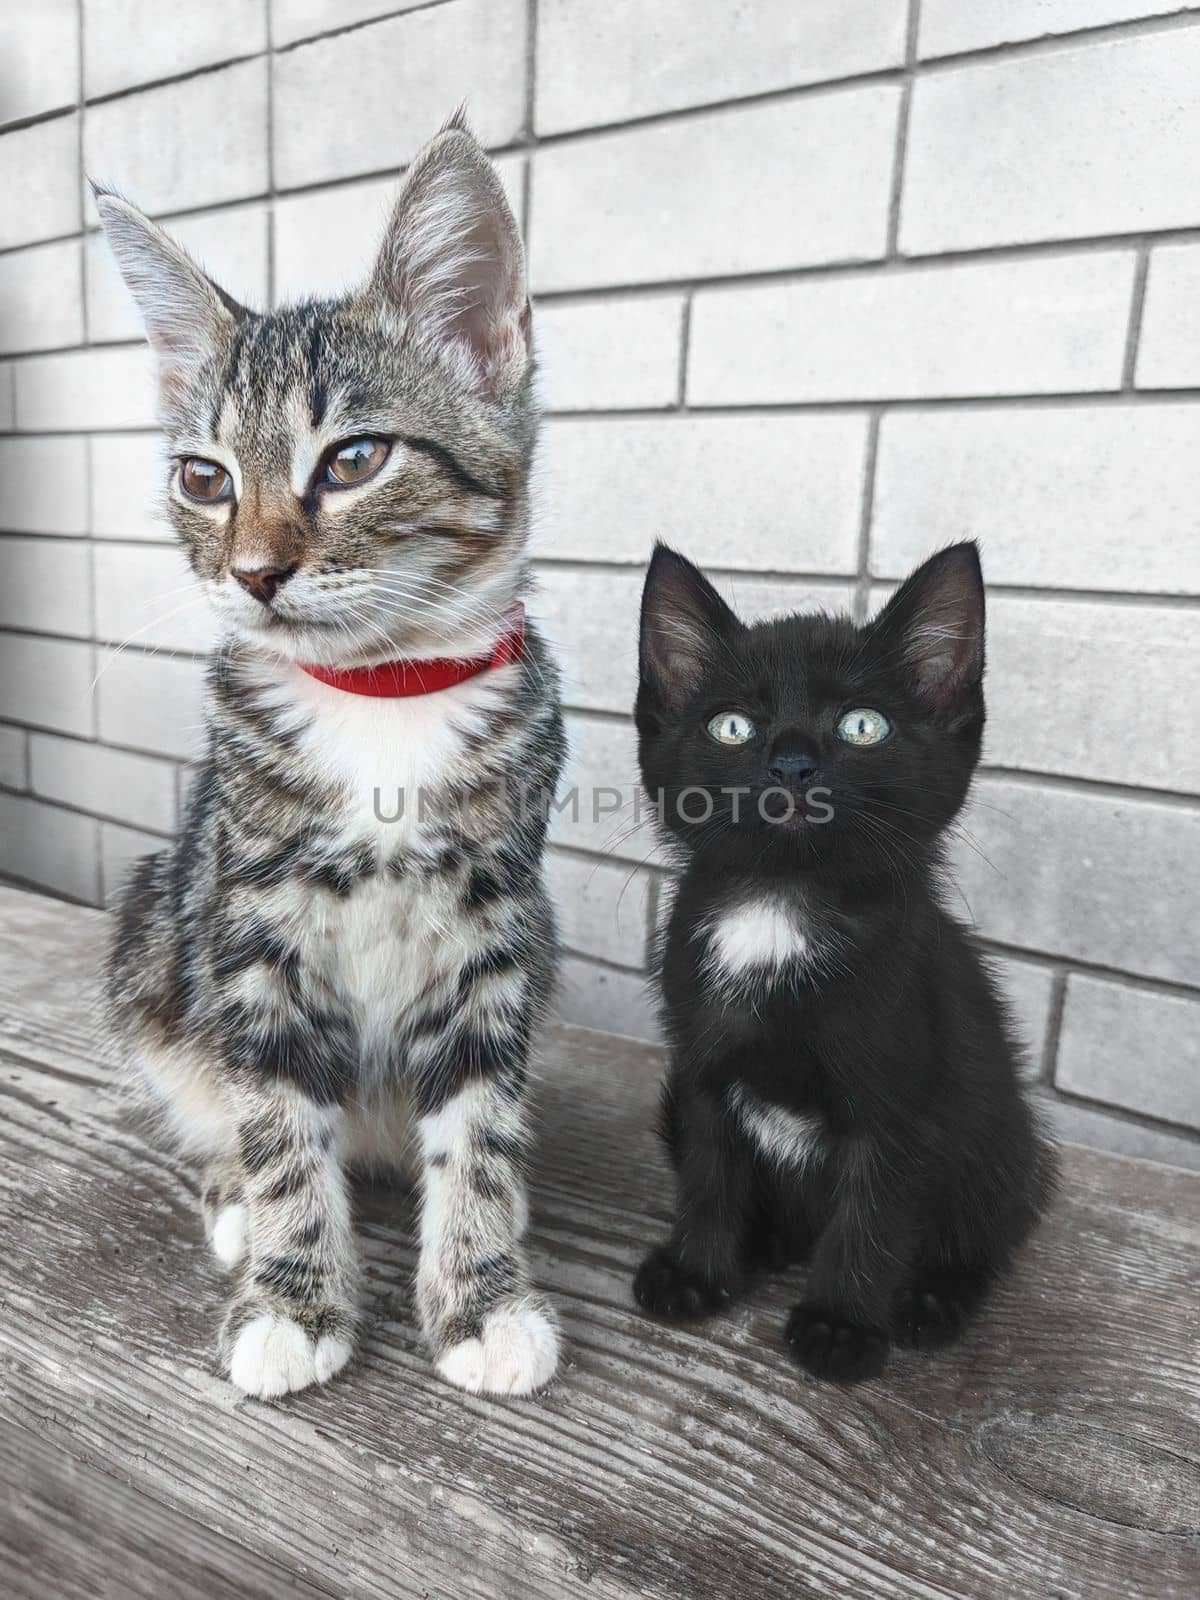 A beautiful gray tabby cat with a red collar sits against a brick wall, a cute black kitten with a white spot on the chest sits nearby. by Nickstock